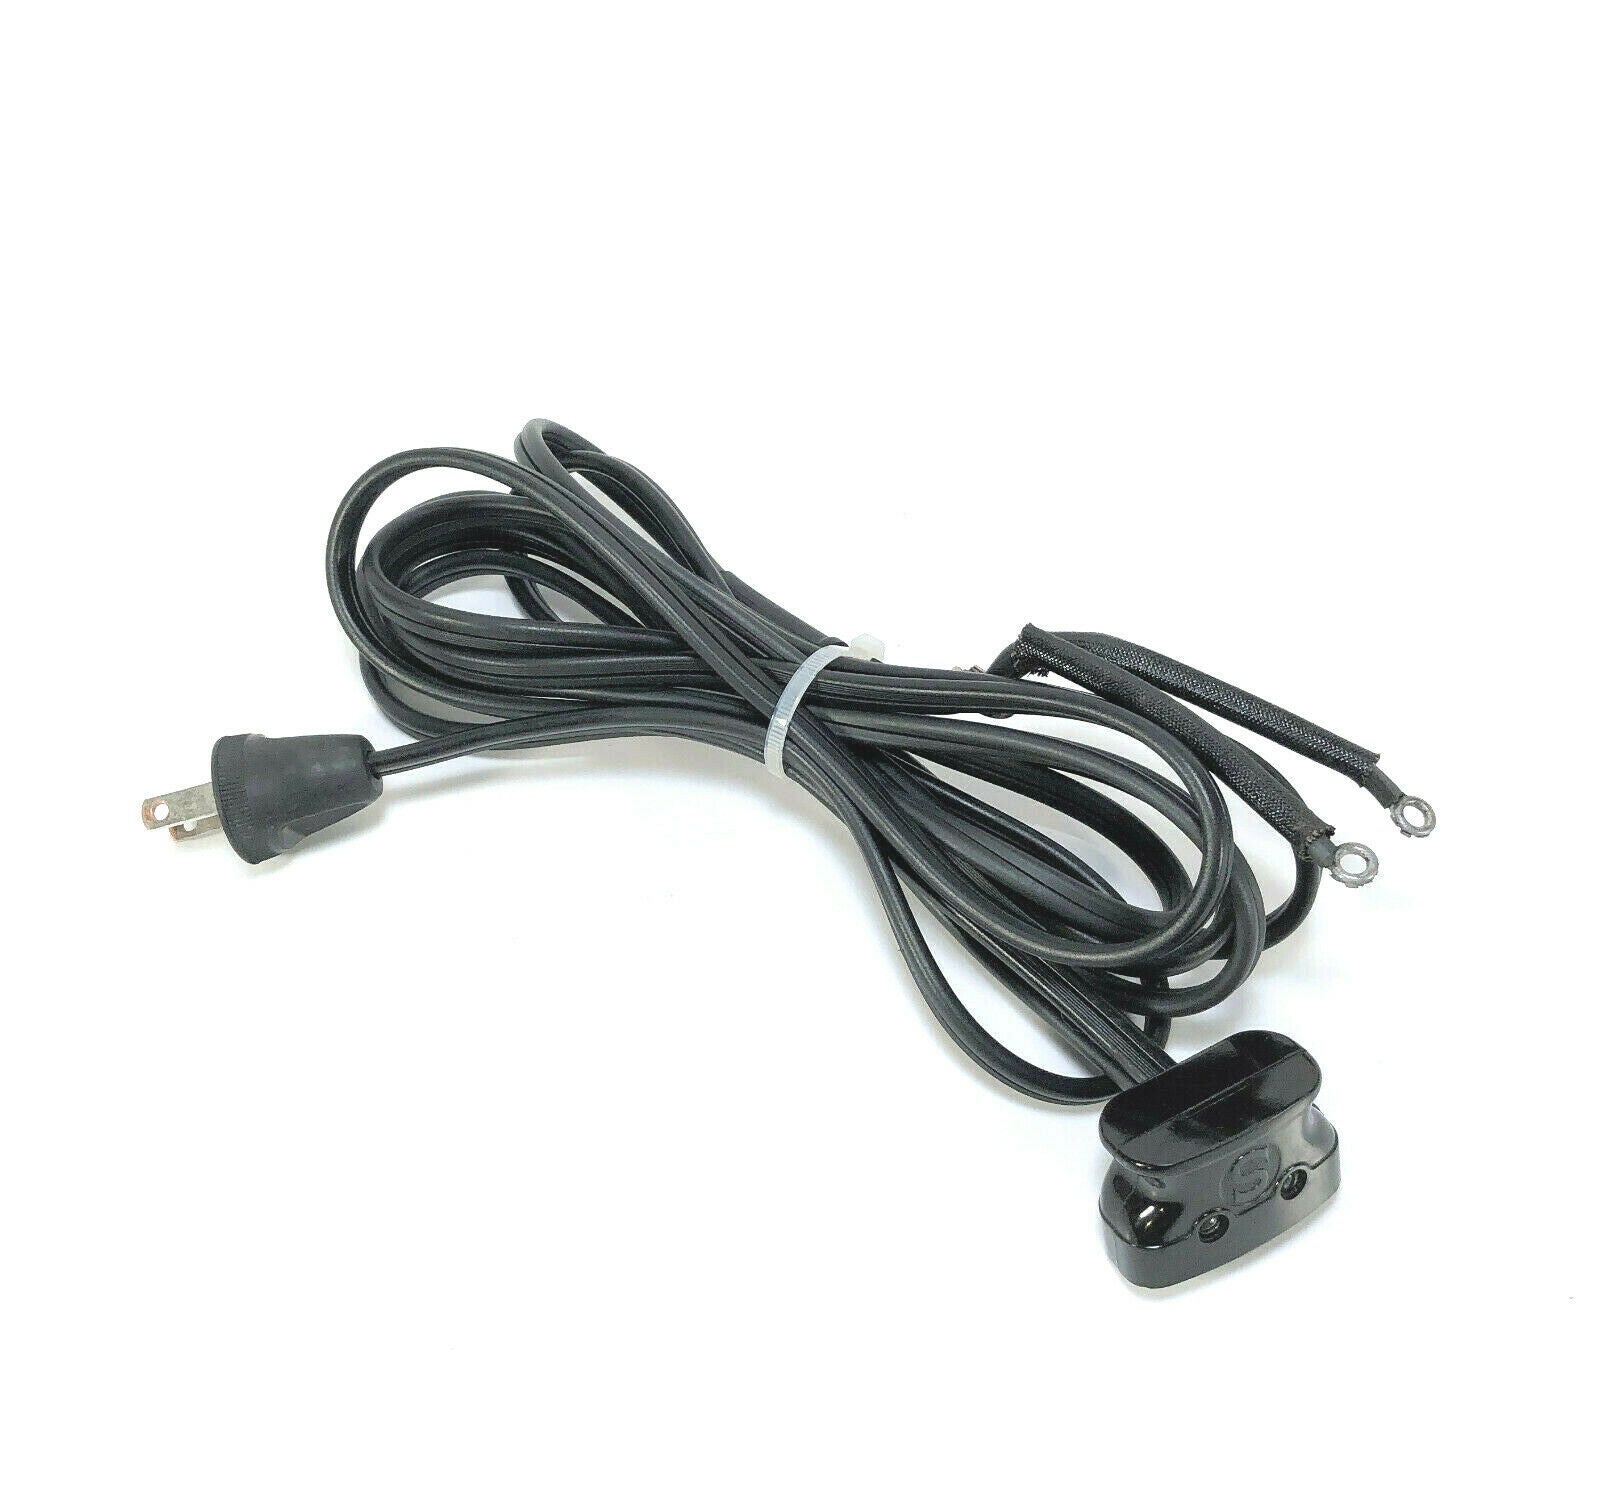 Singer Sewing Machine Power Cord Double Lead Fits 66, 99, 15-86